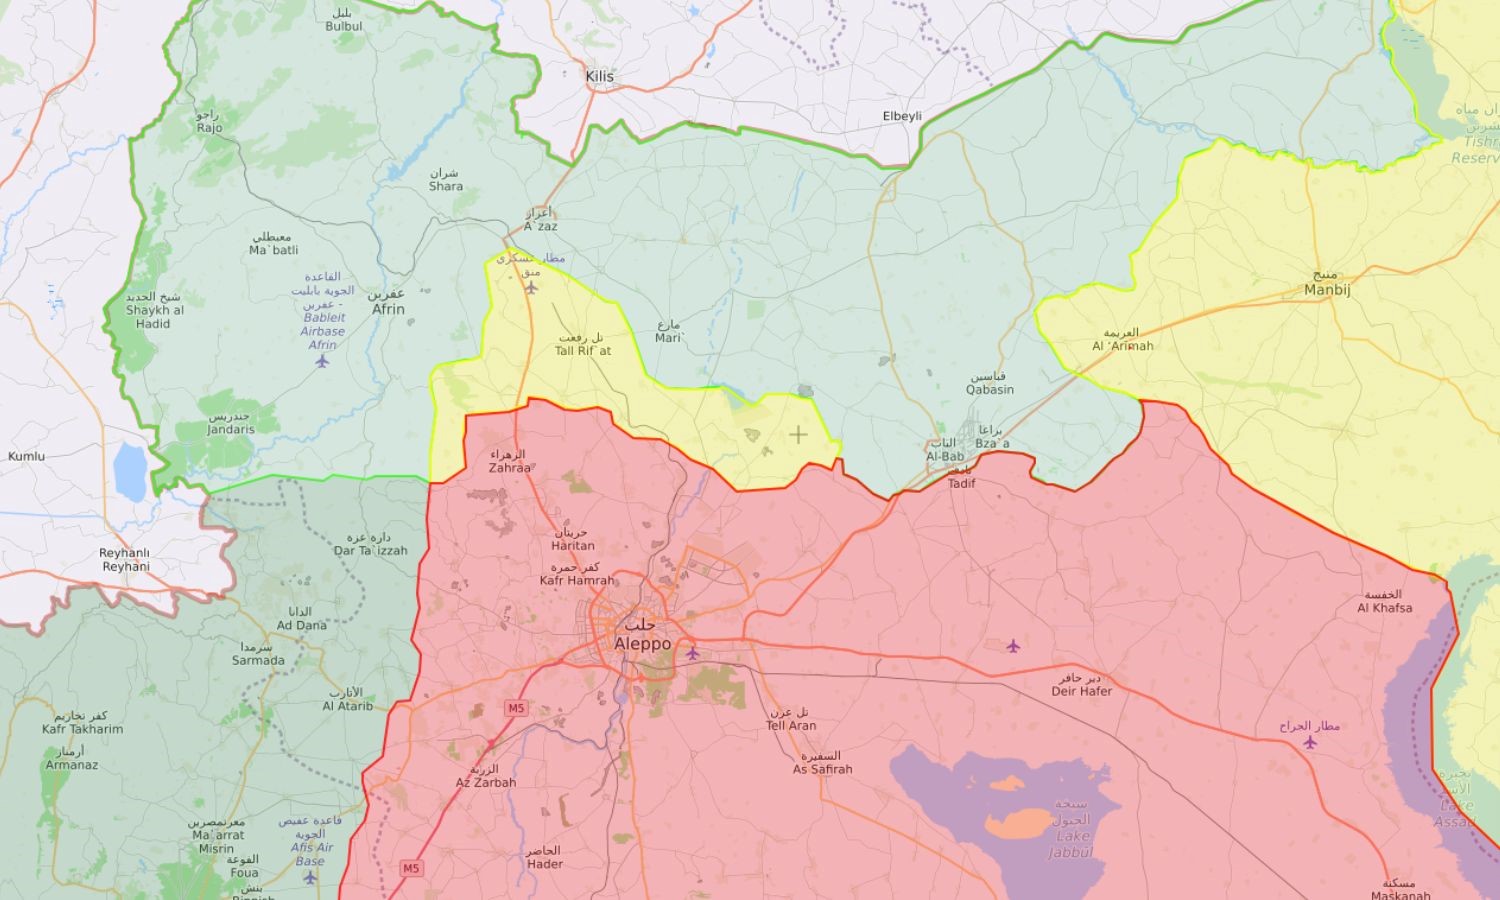 The city of Tal Rifaat appears separate from the city of Manbij and isolated from the other SDF-controlled areas in Manbij and Ayn al-Arab/Kobani. It also separates areas of Turkish influence from the city of Aleppo.